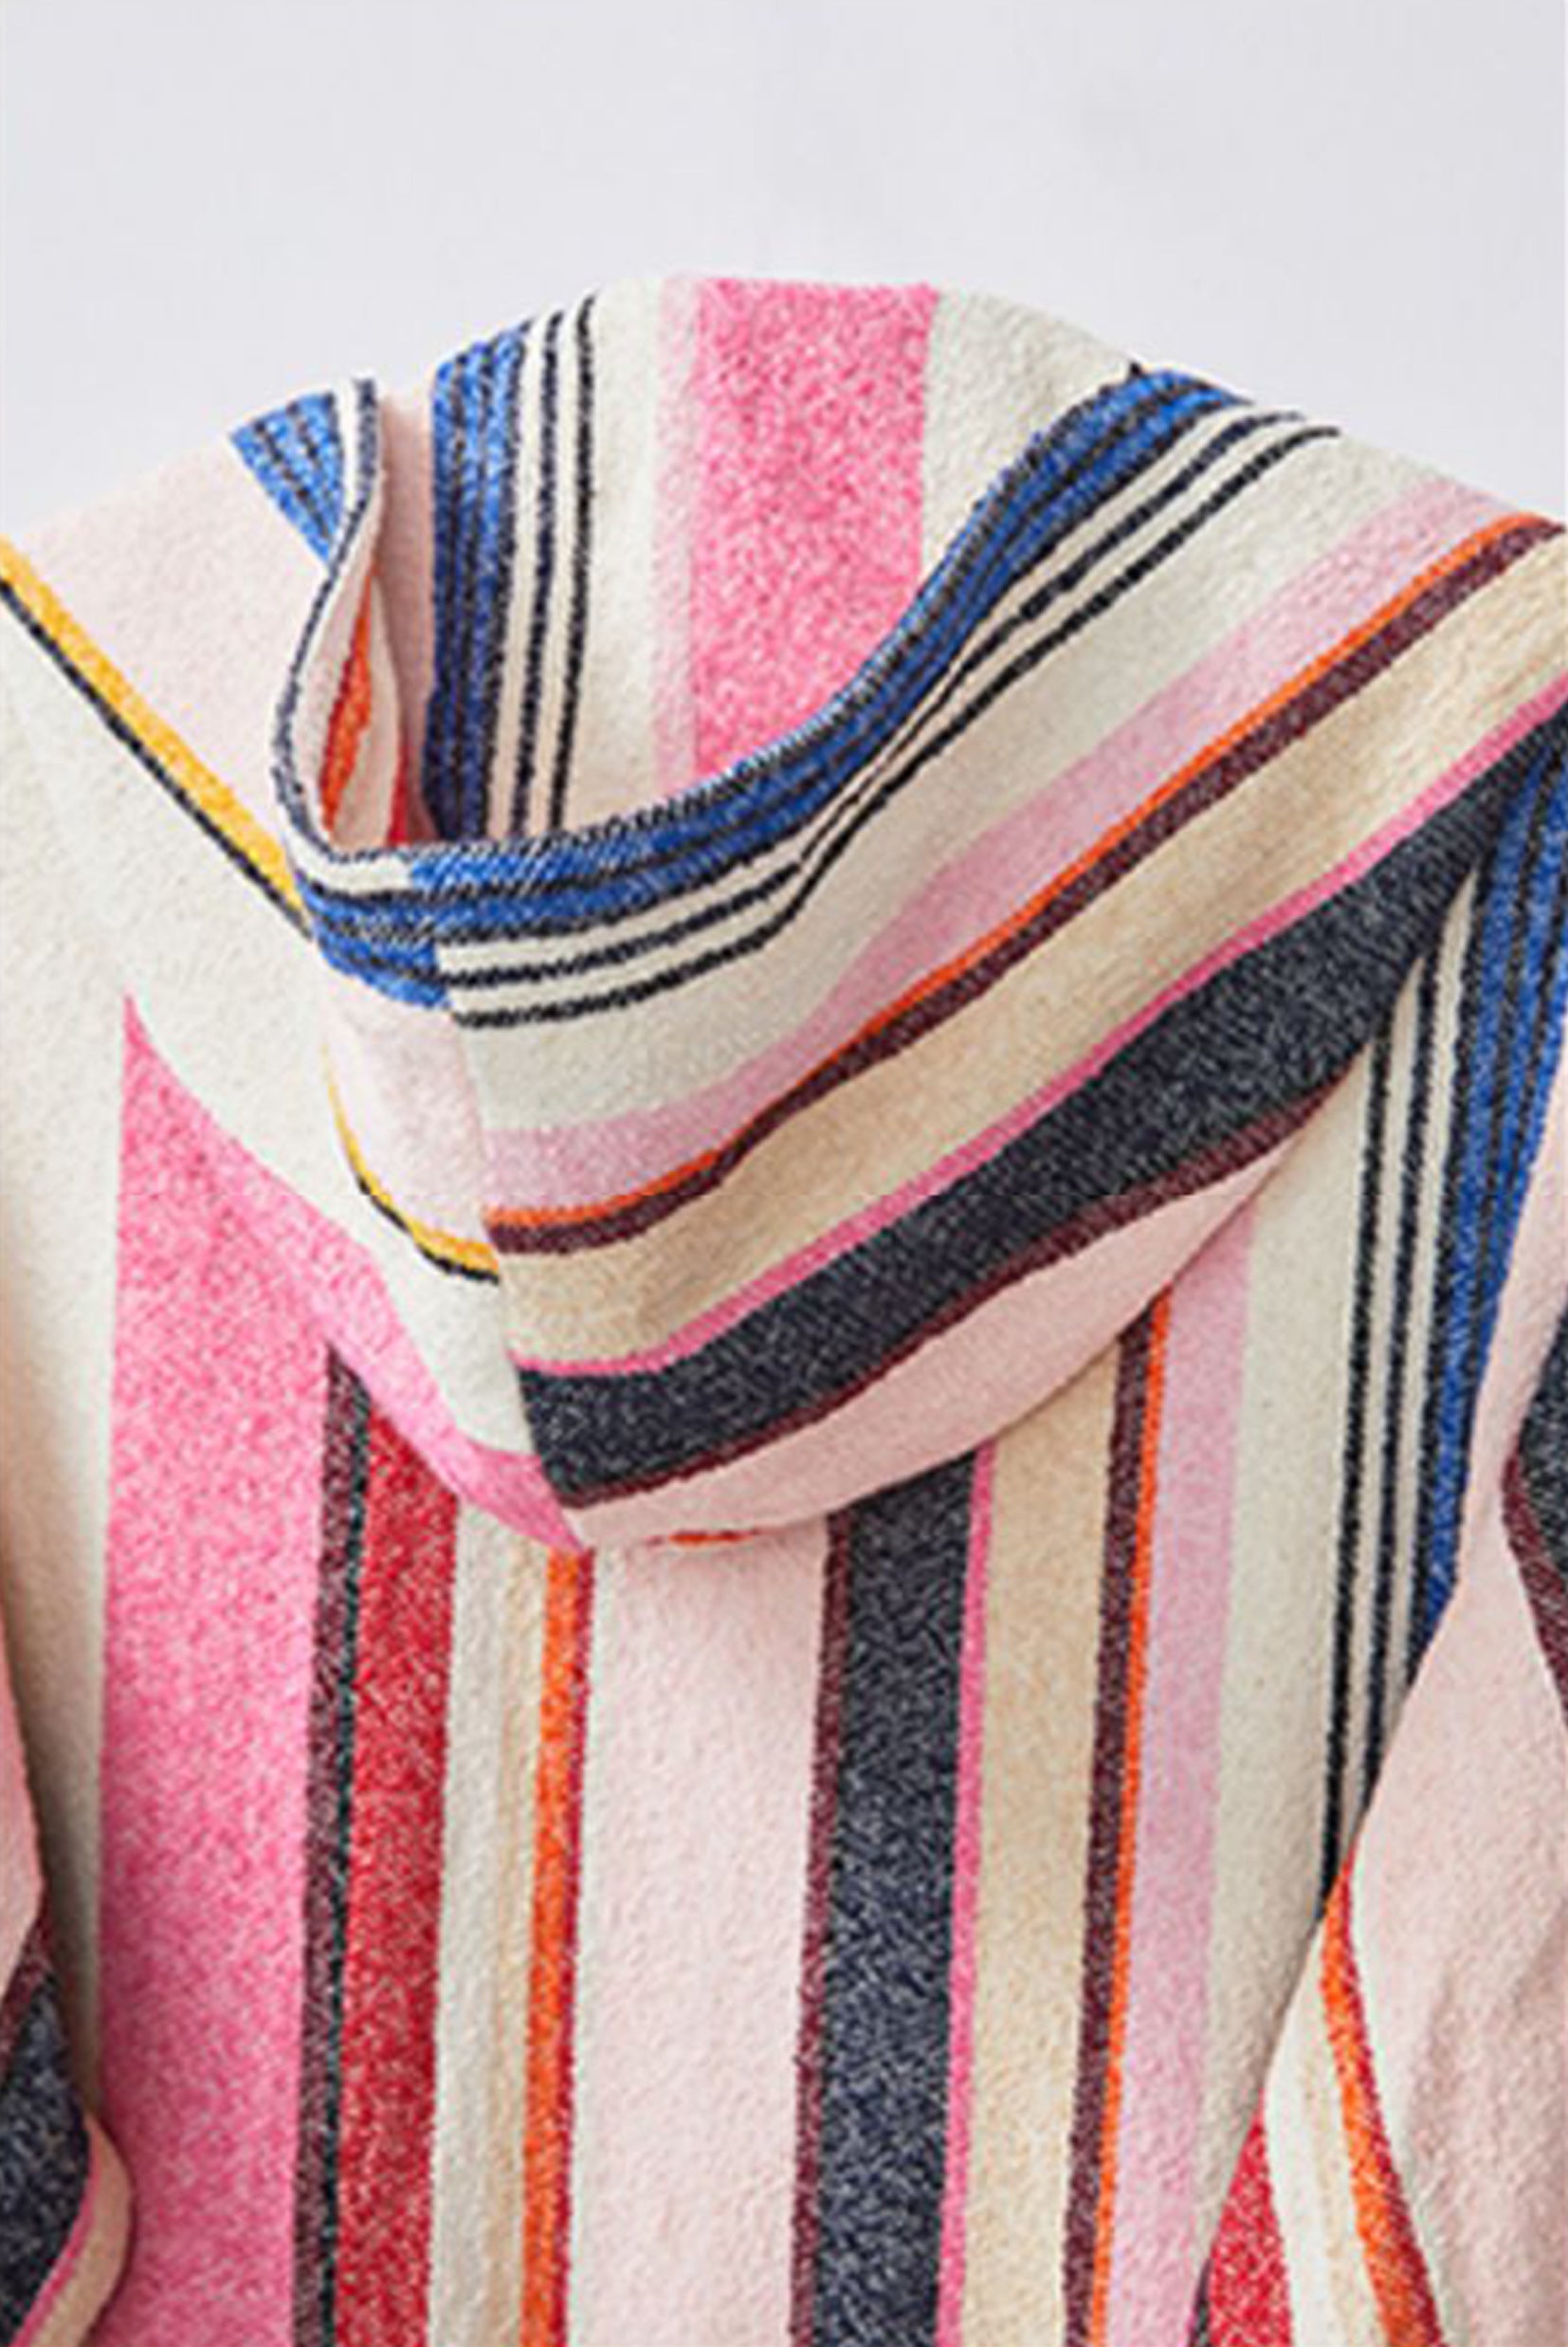 Striped hooded robe in multicolour